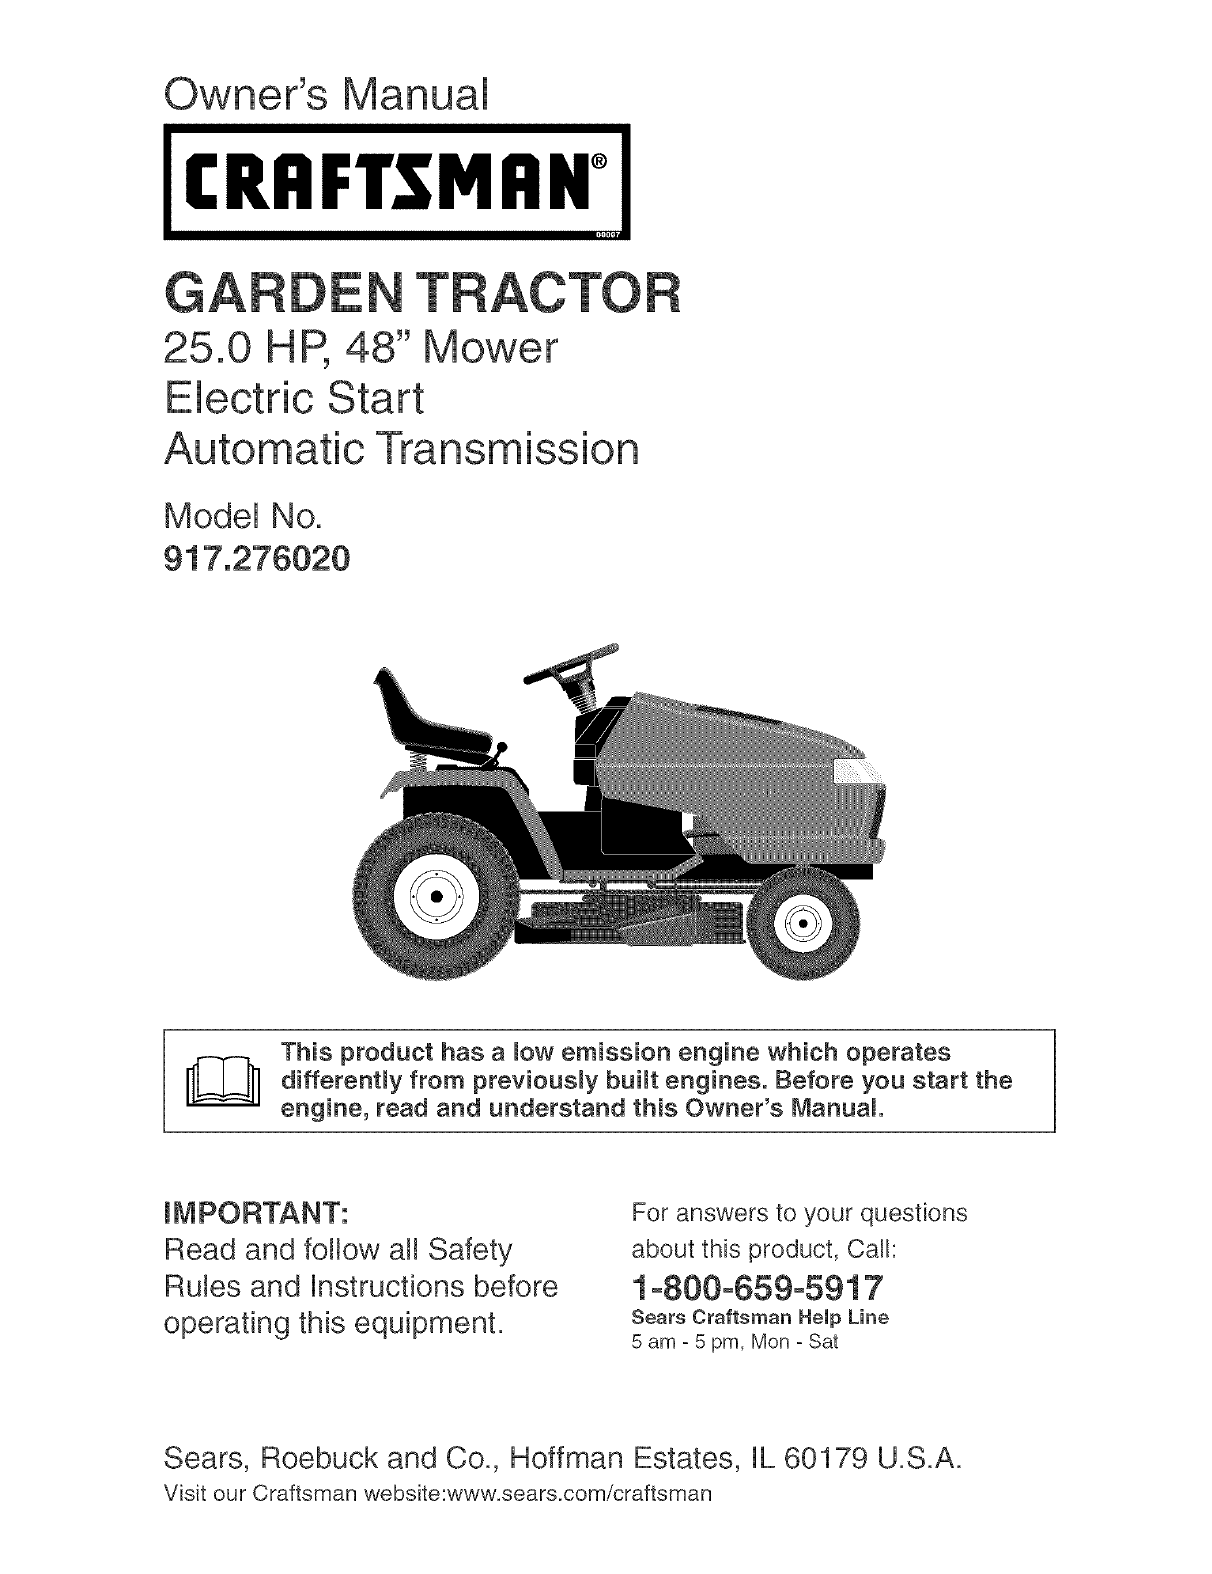 Craftsman 917276020 User Manual GARDEN TRACTOR Manuals And Guides L0408155